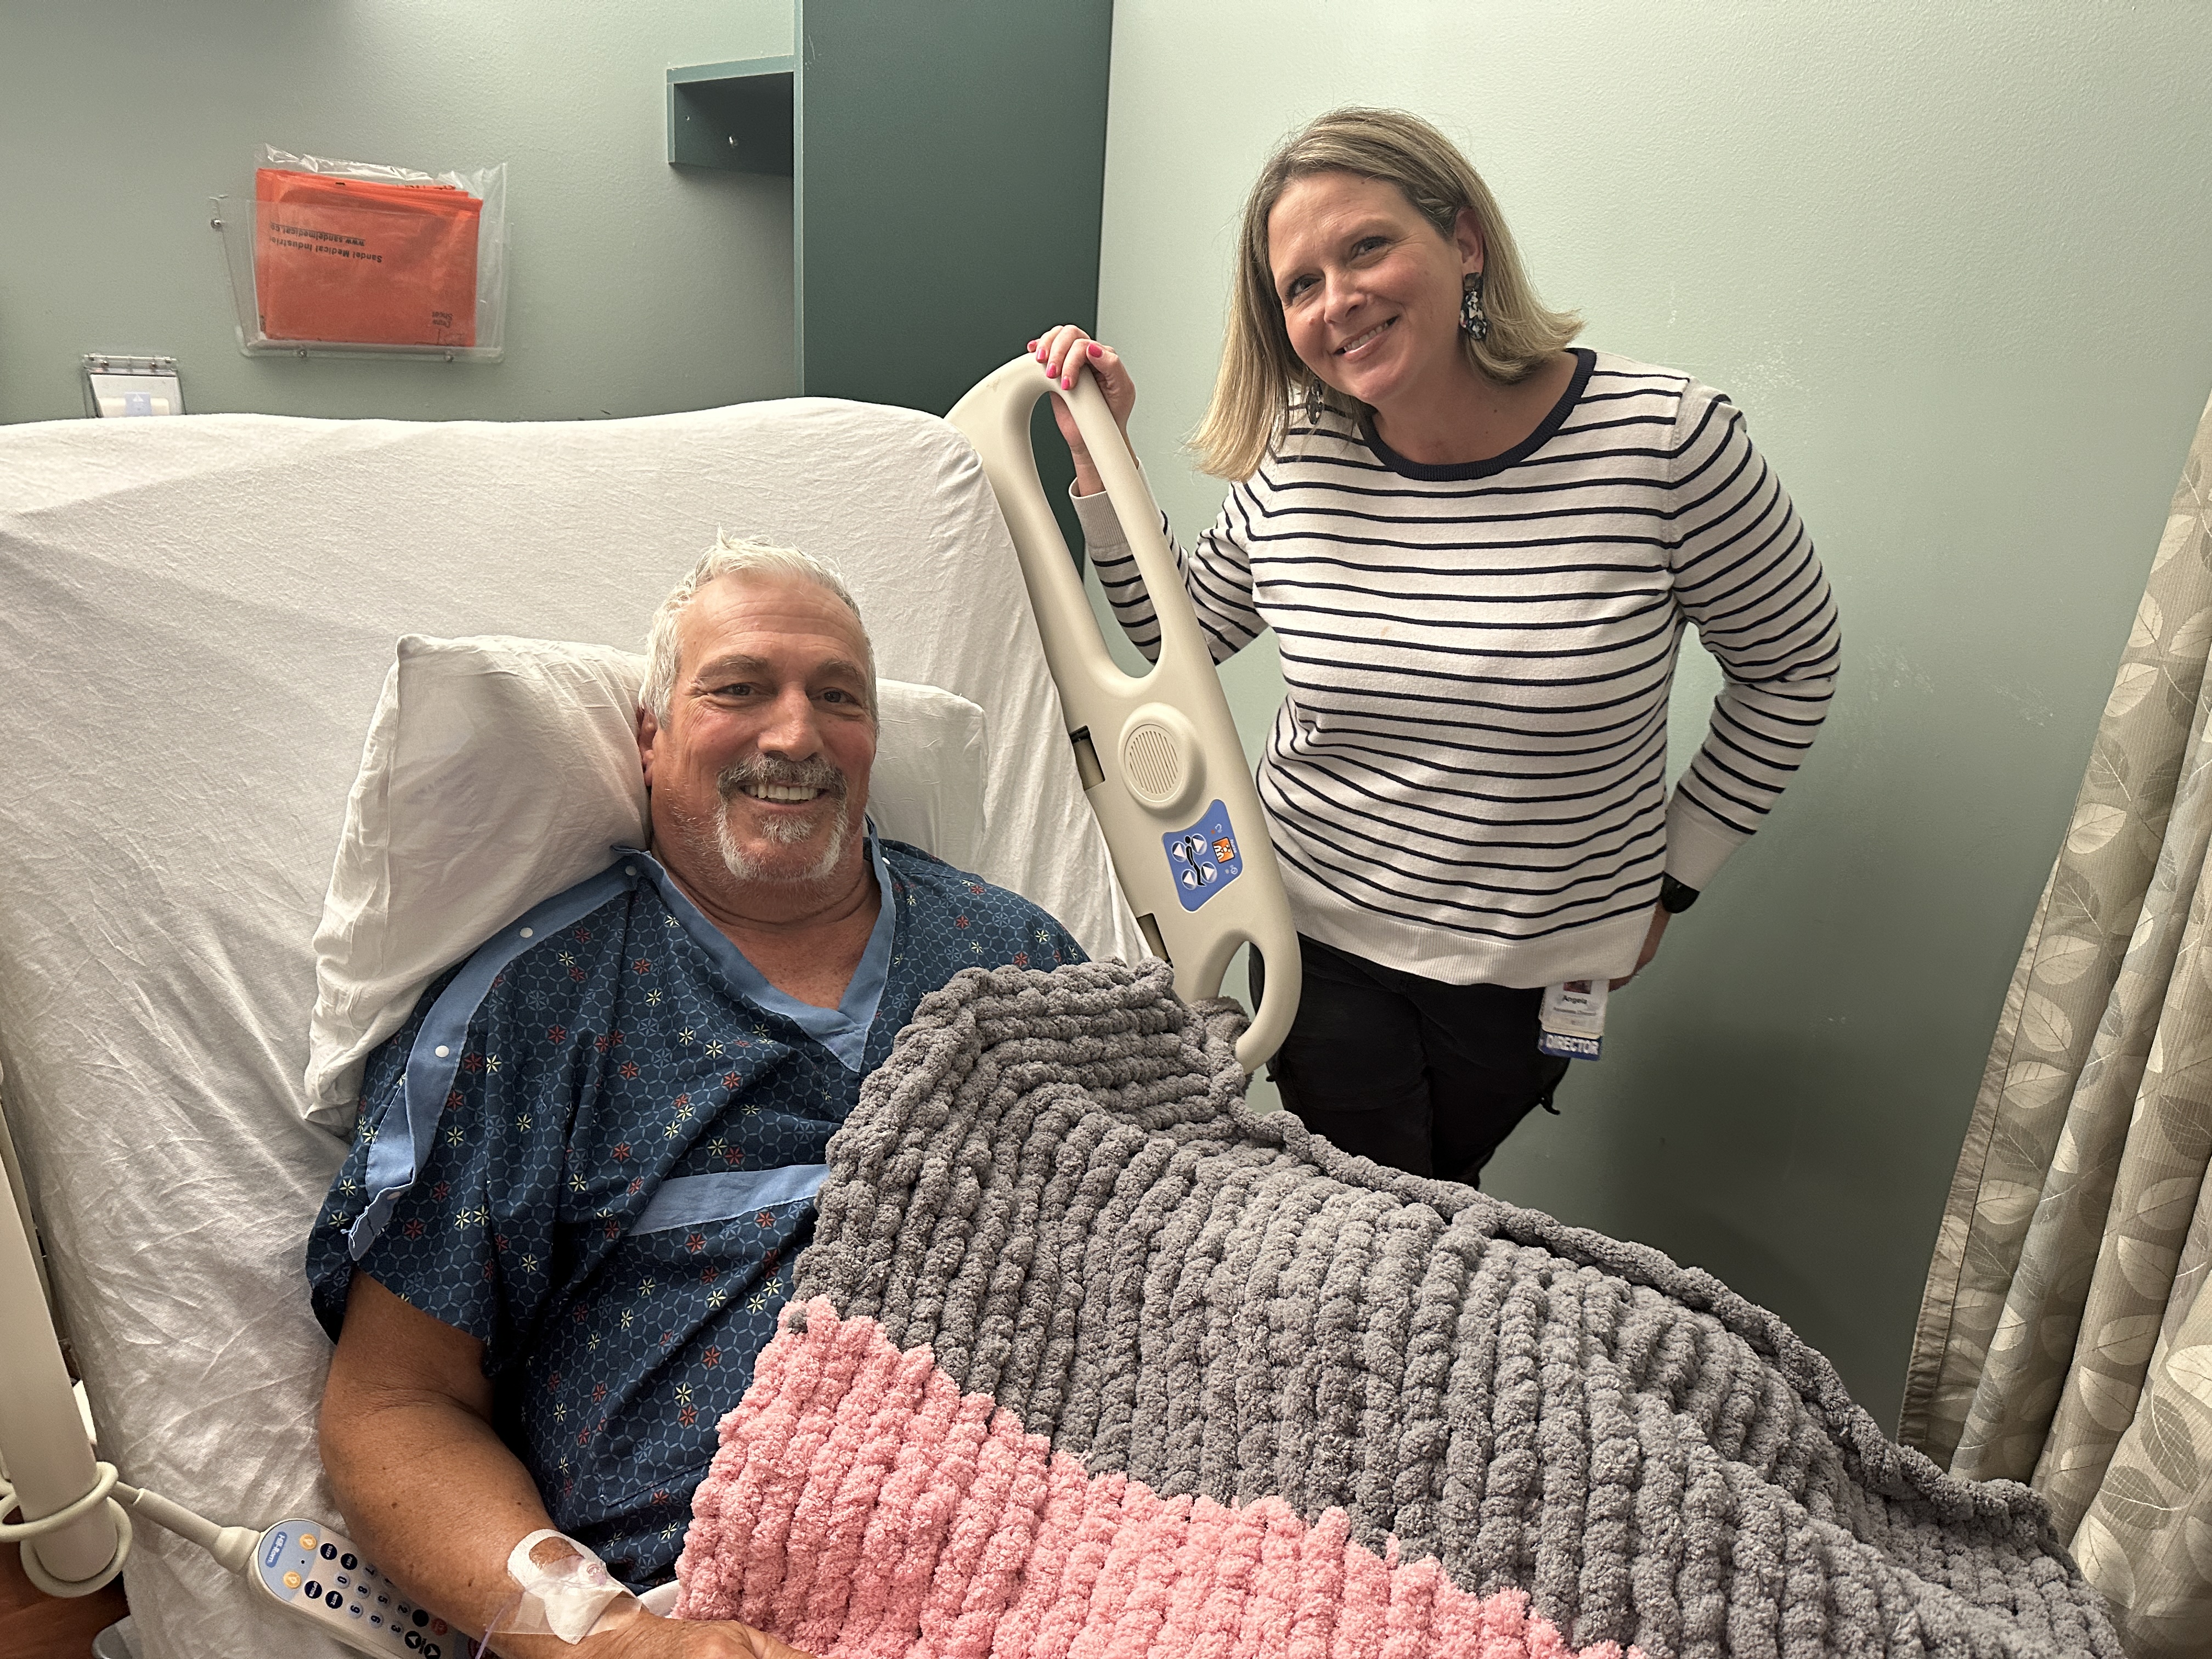 Colleague poses with patient who she provided a handmade blanket to that she knitted for patients on Valentine's Day.